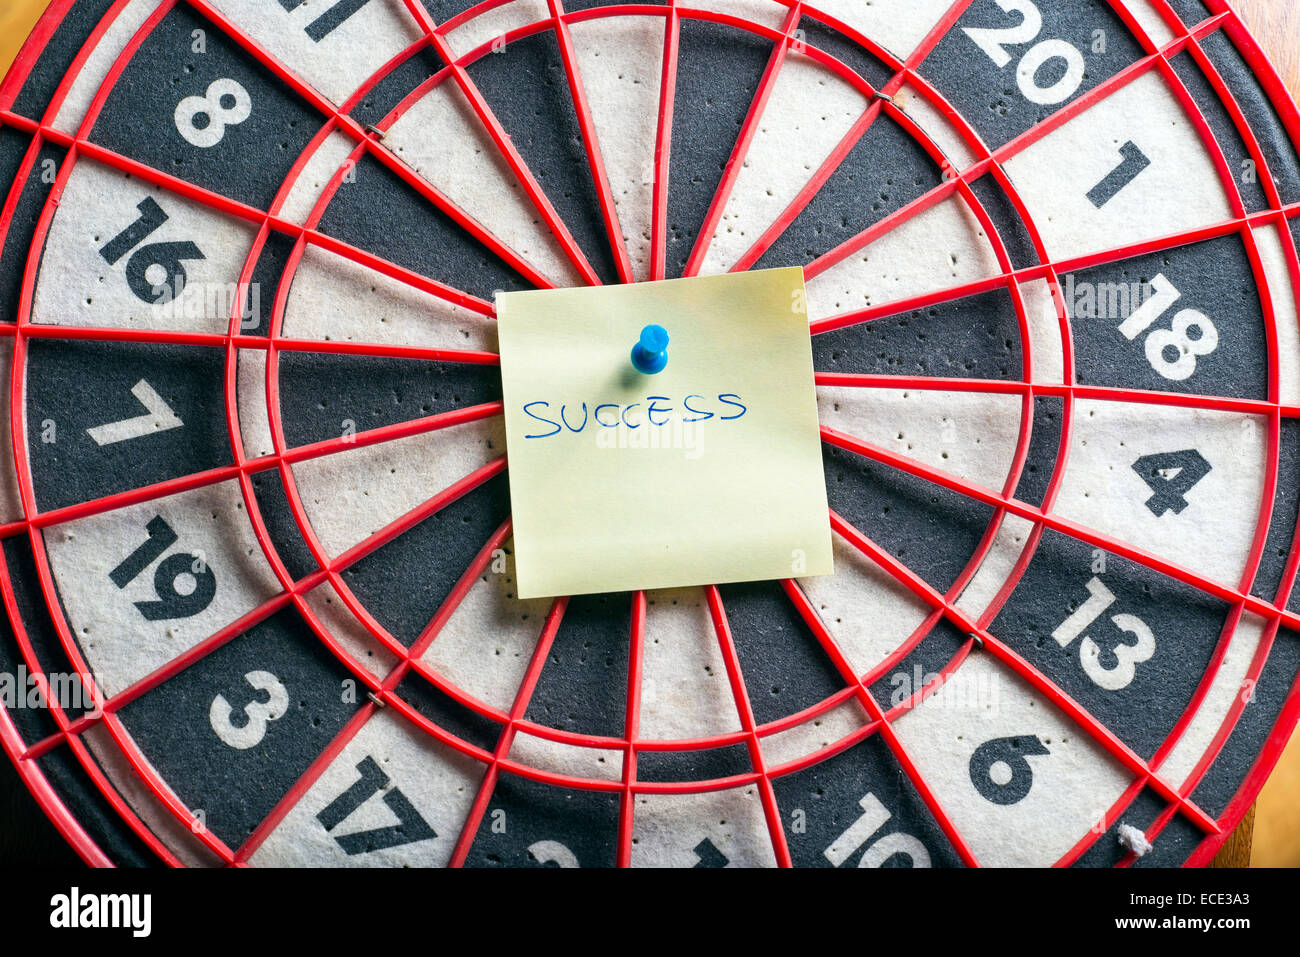 the word success in the center of a dartboard Stock Photo